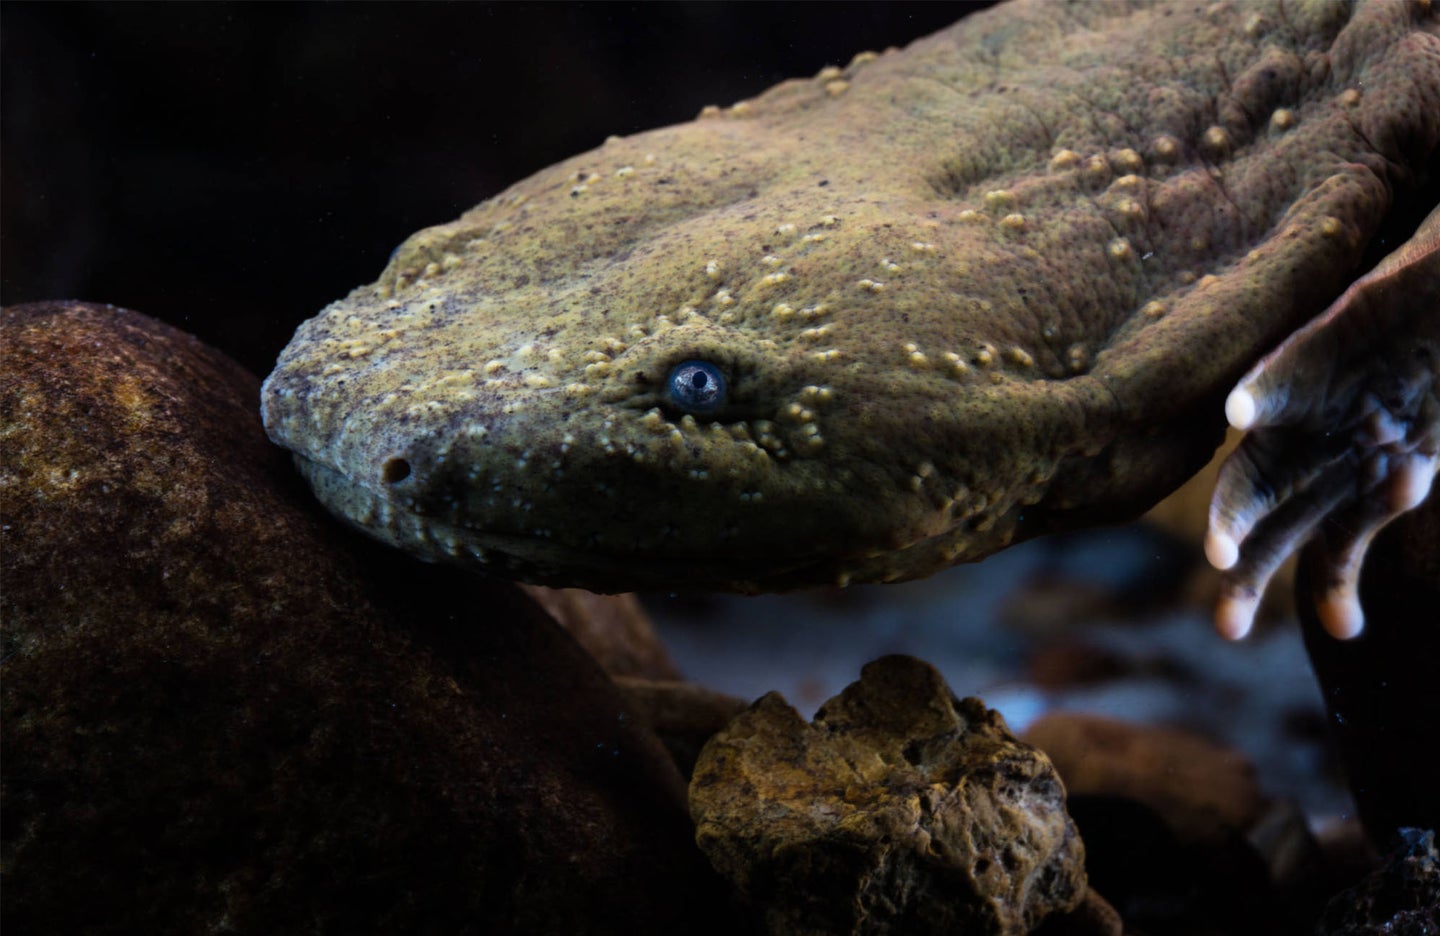 A hellbender peers out with its blue eye from a rock